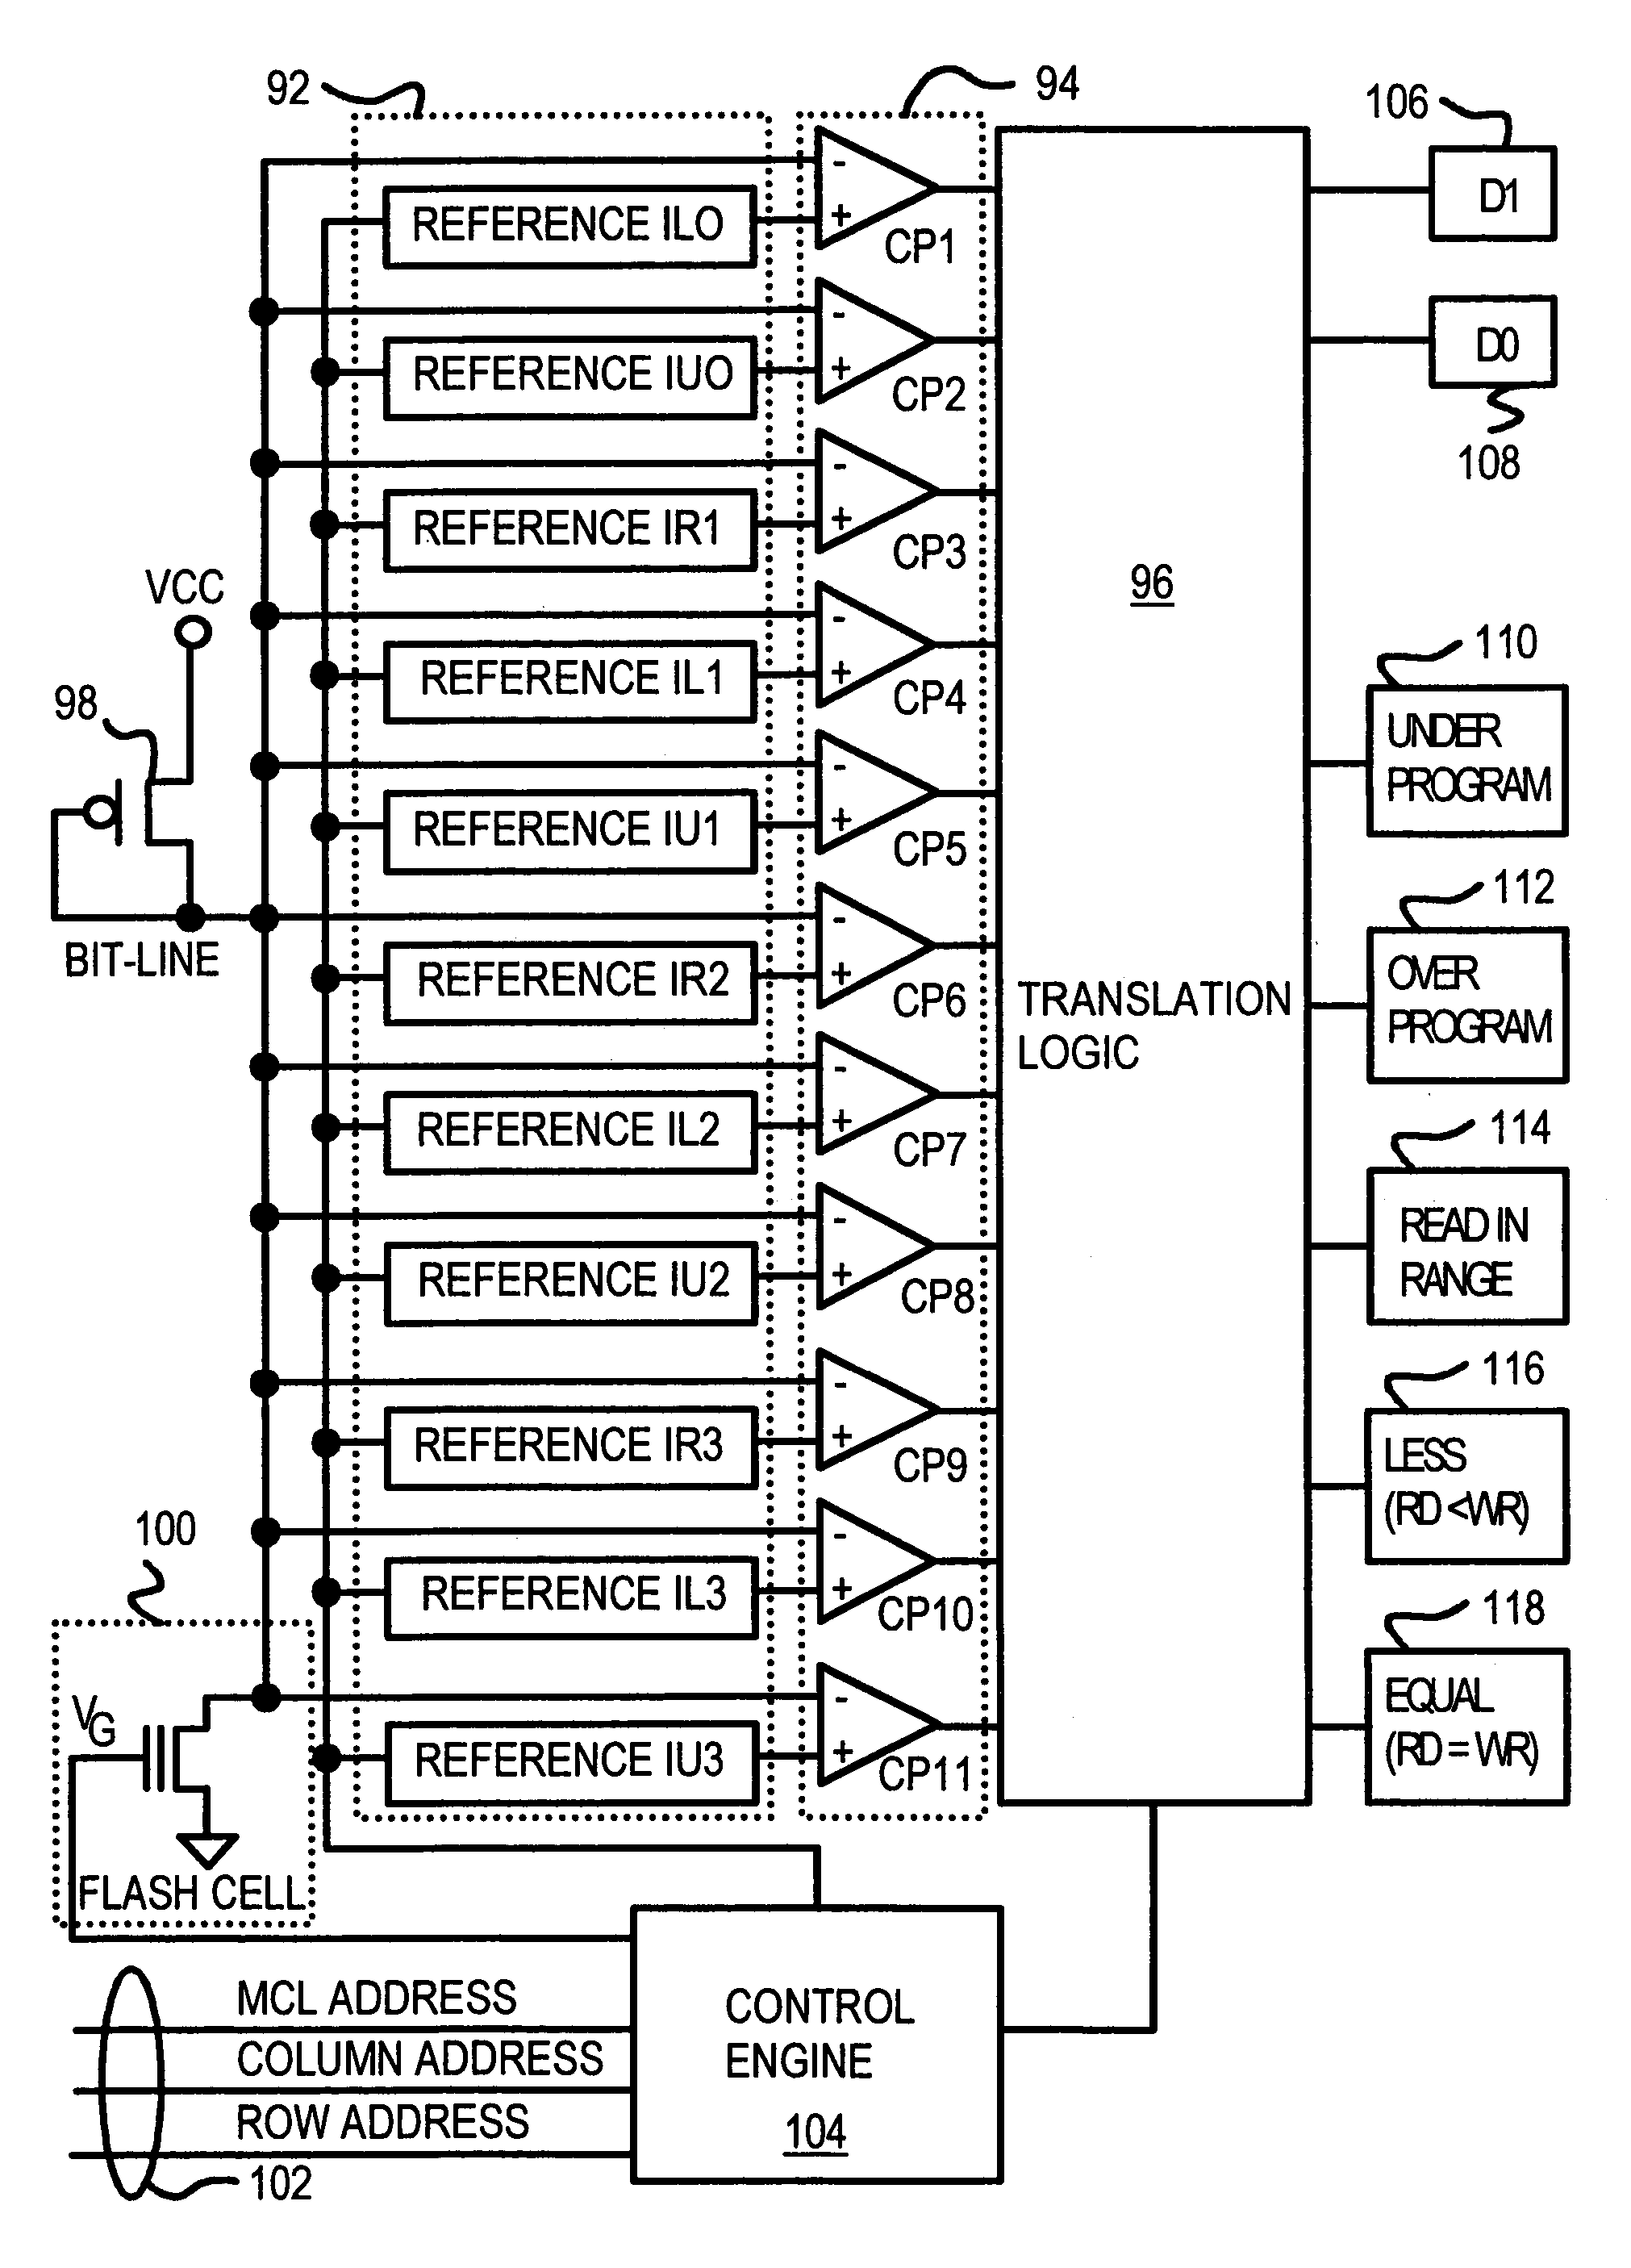 Flash memory device and architecture with multi level cells